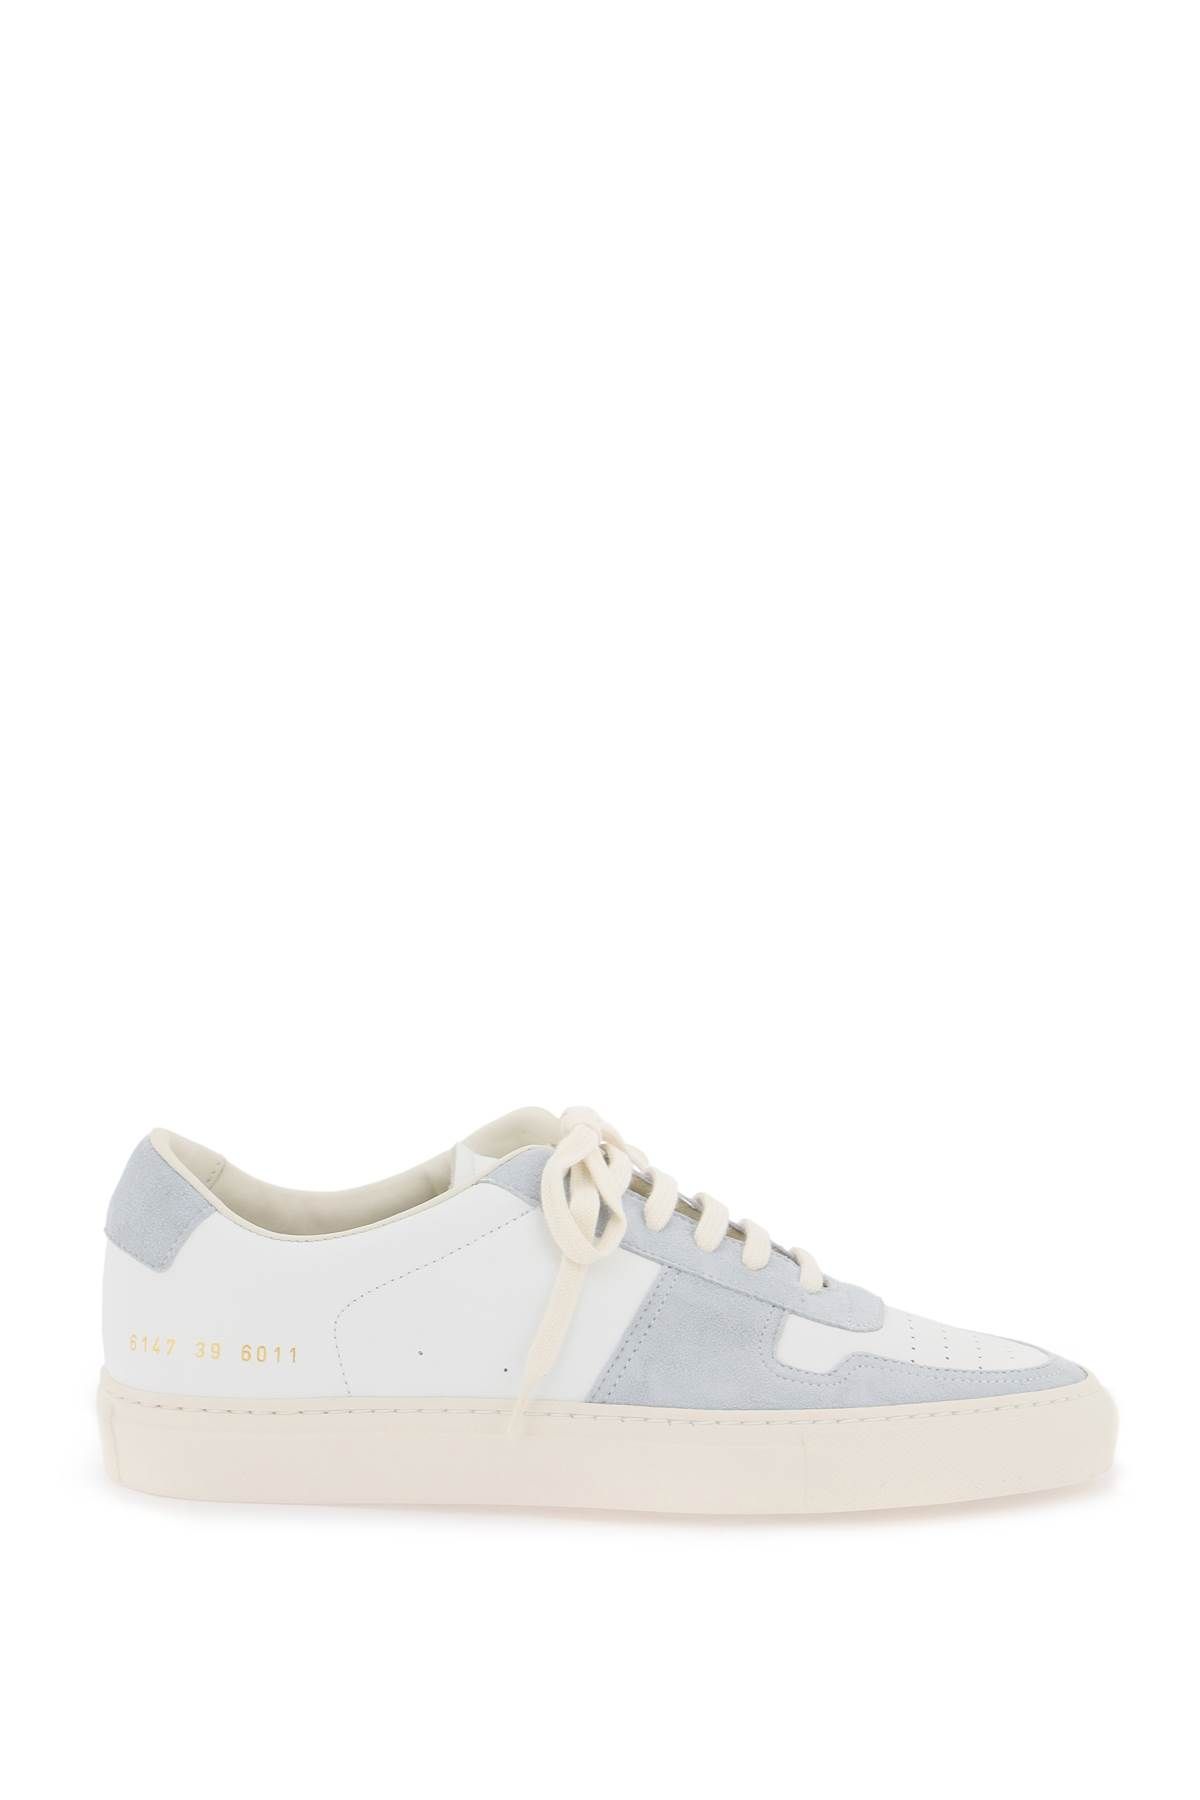 Shop Common Projects Basketball Sneaker In White,light Blue